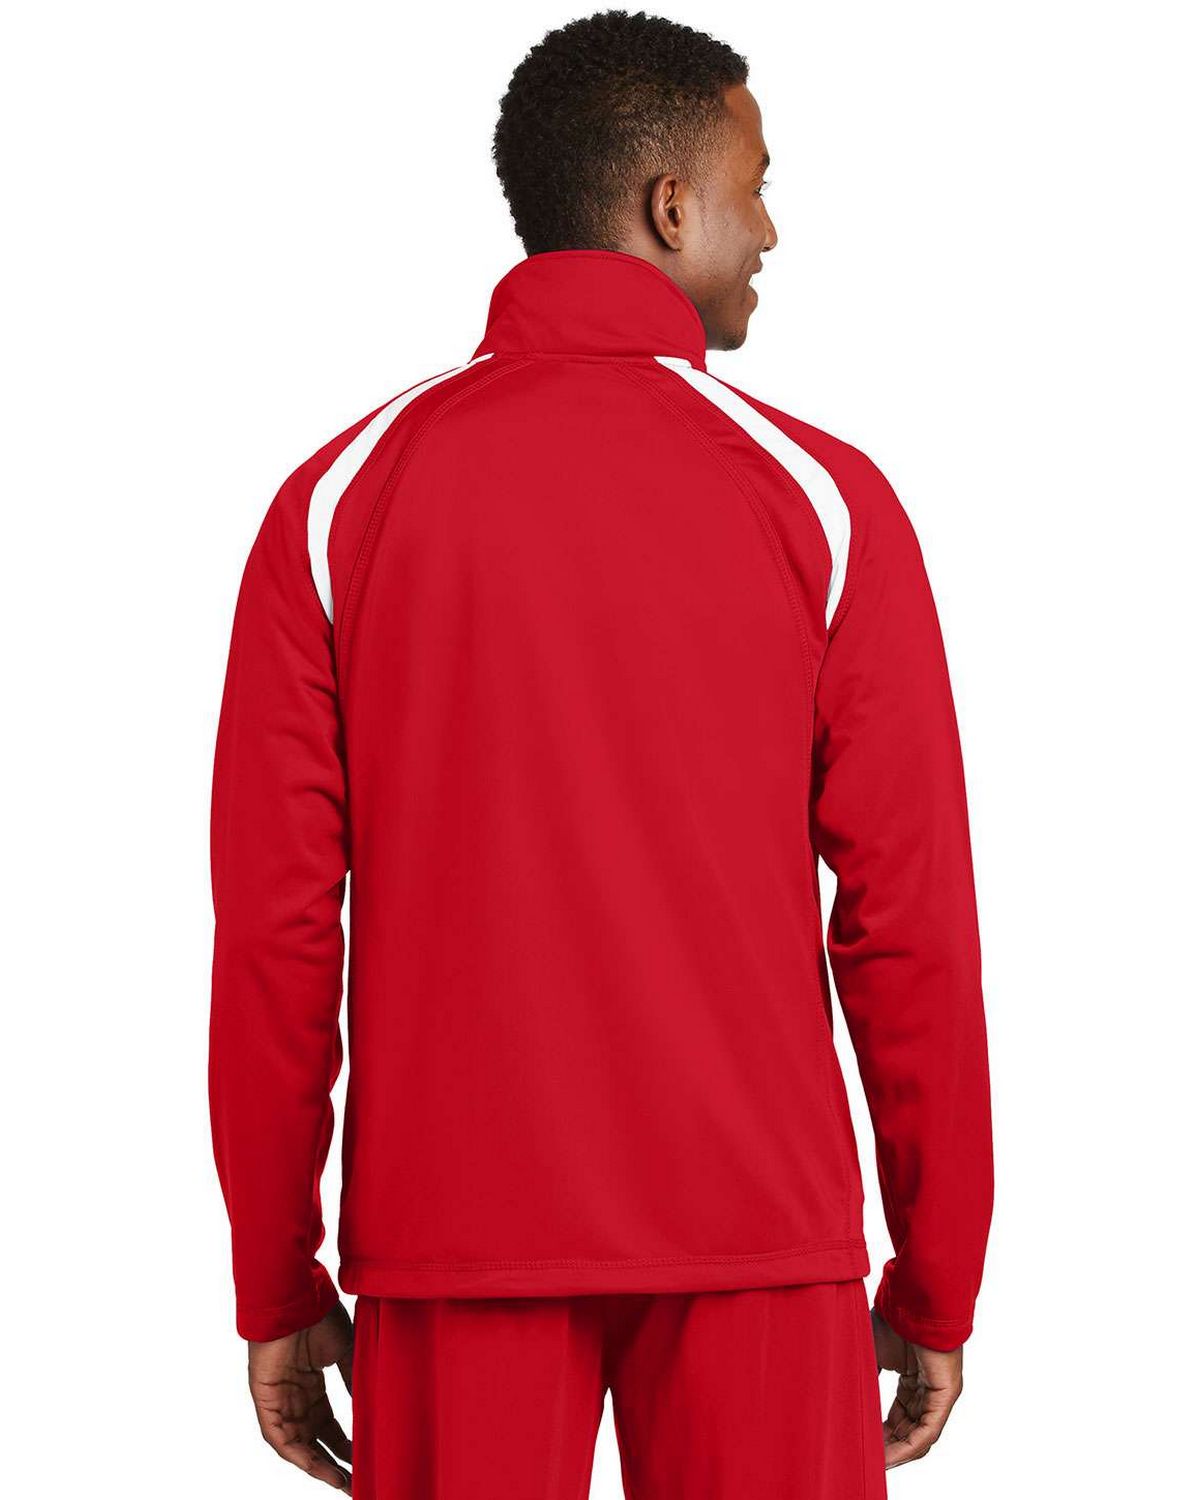 Section 101 by Majestic Athletic Texas Tech Red Raiders Tricot Track Jacket  - Men, Best Price and Reviews